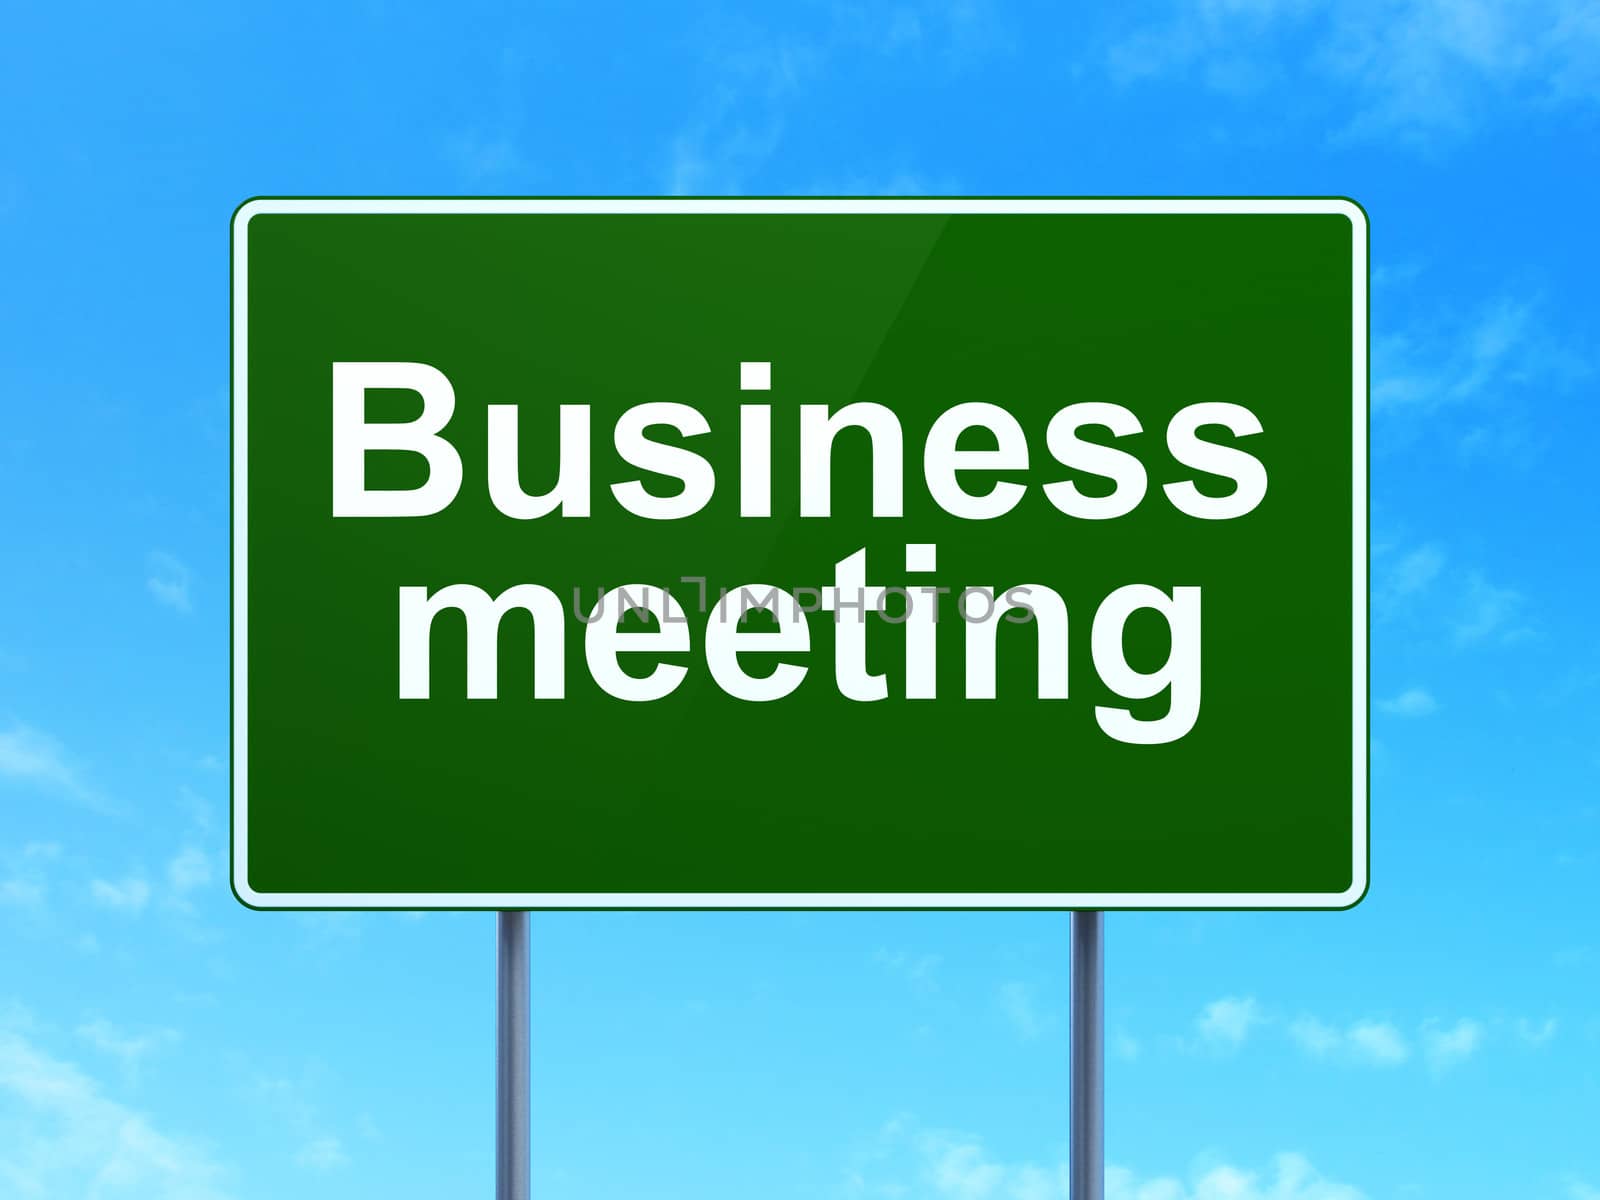 Finance concept: Business Meeting on green road (highway) sign, clear blue sky background, 3d render